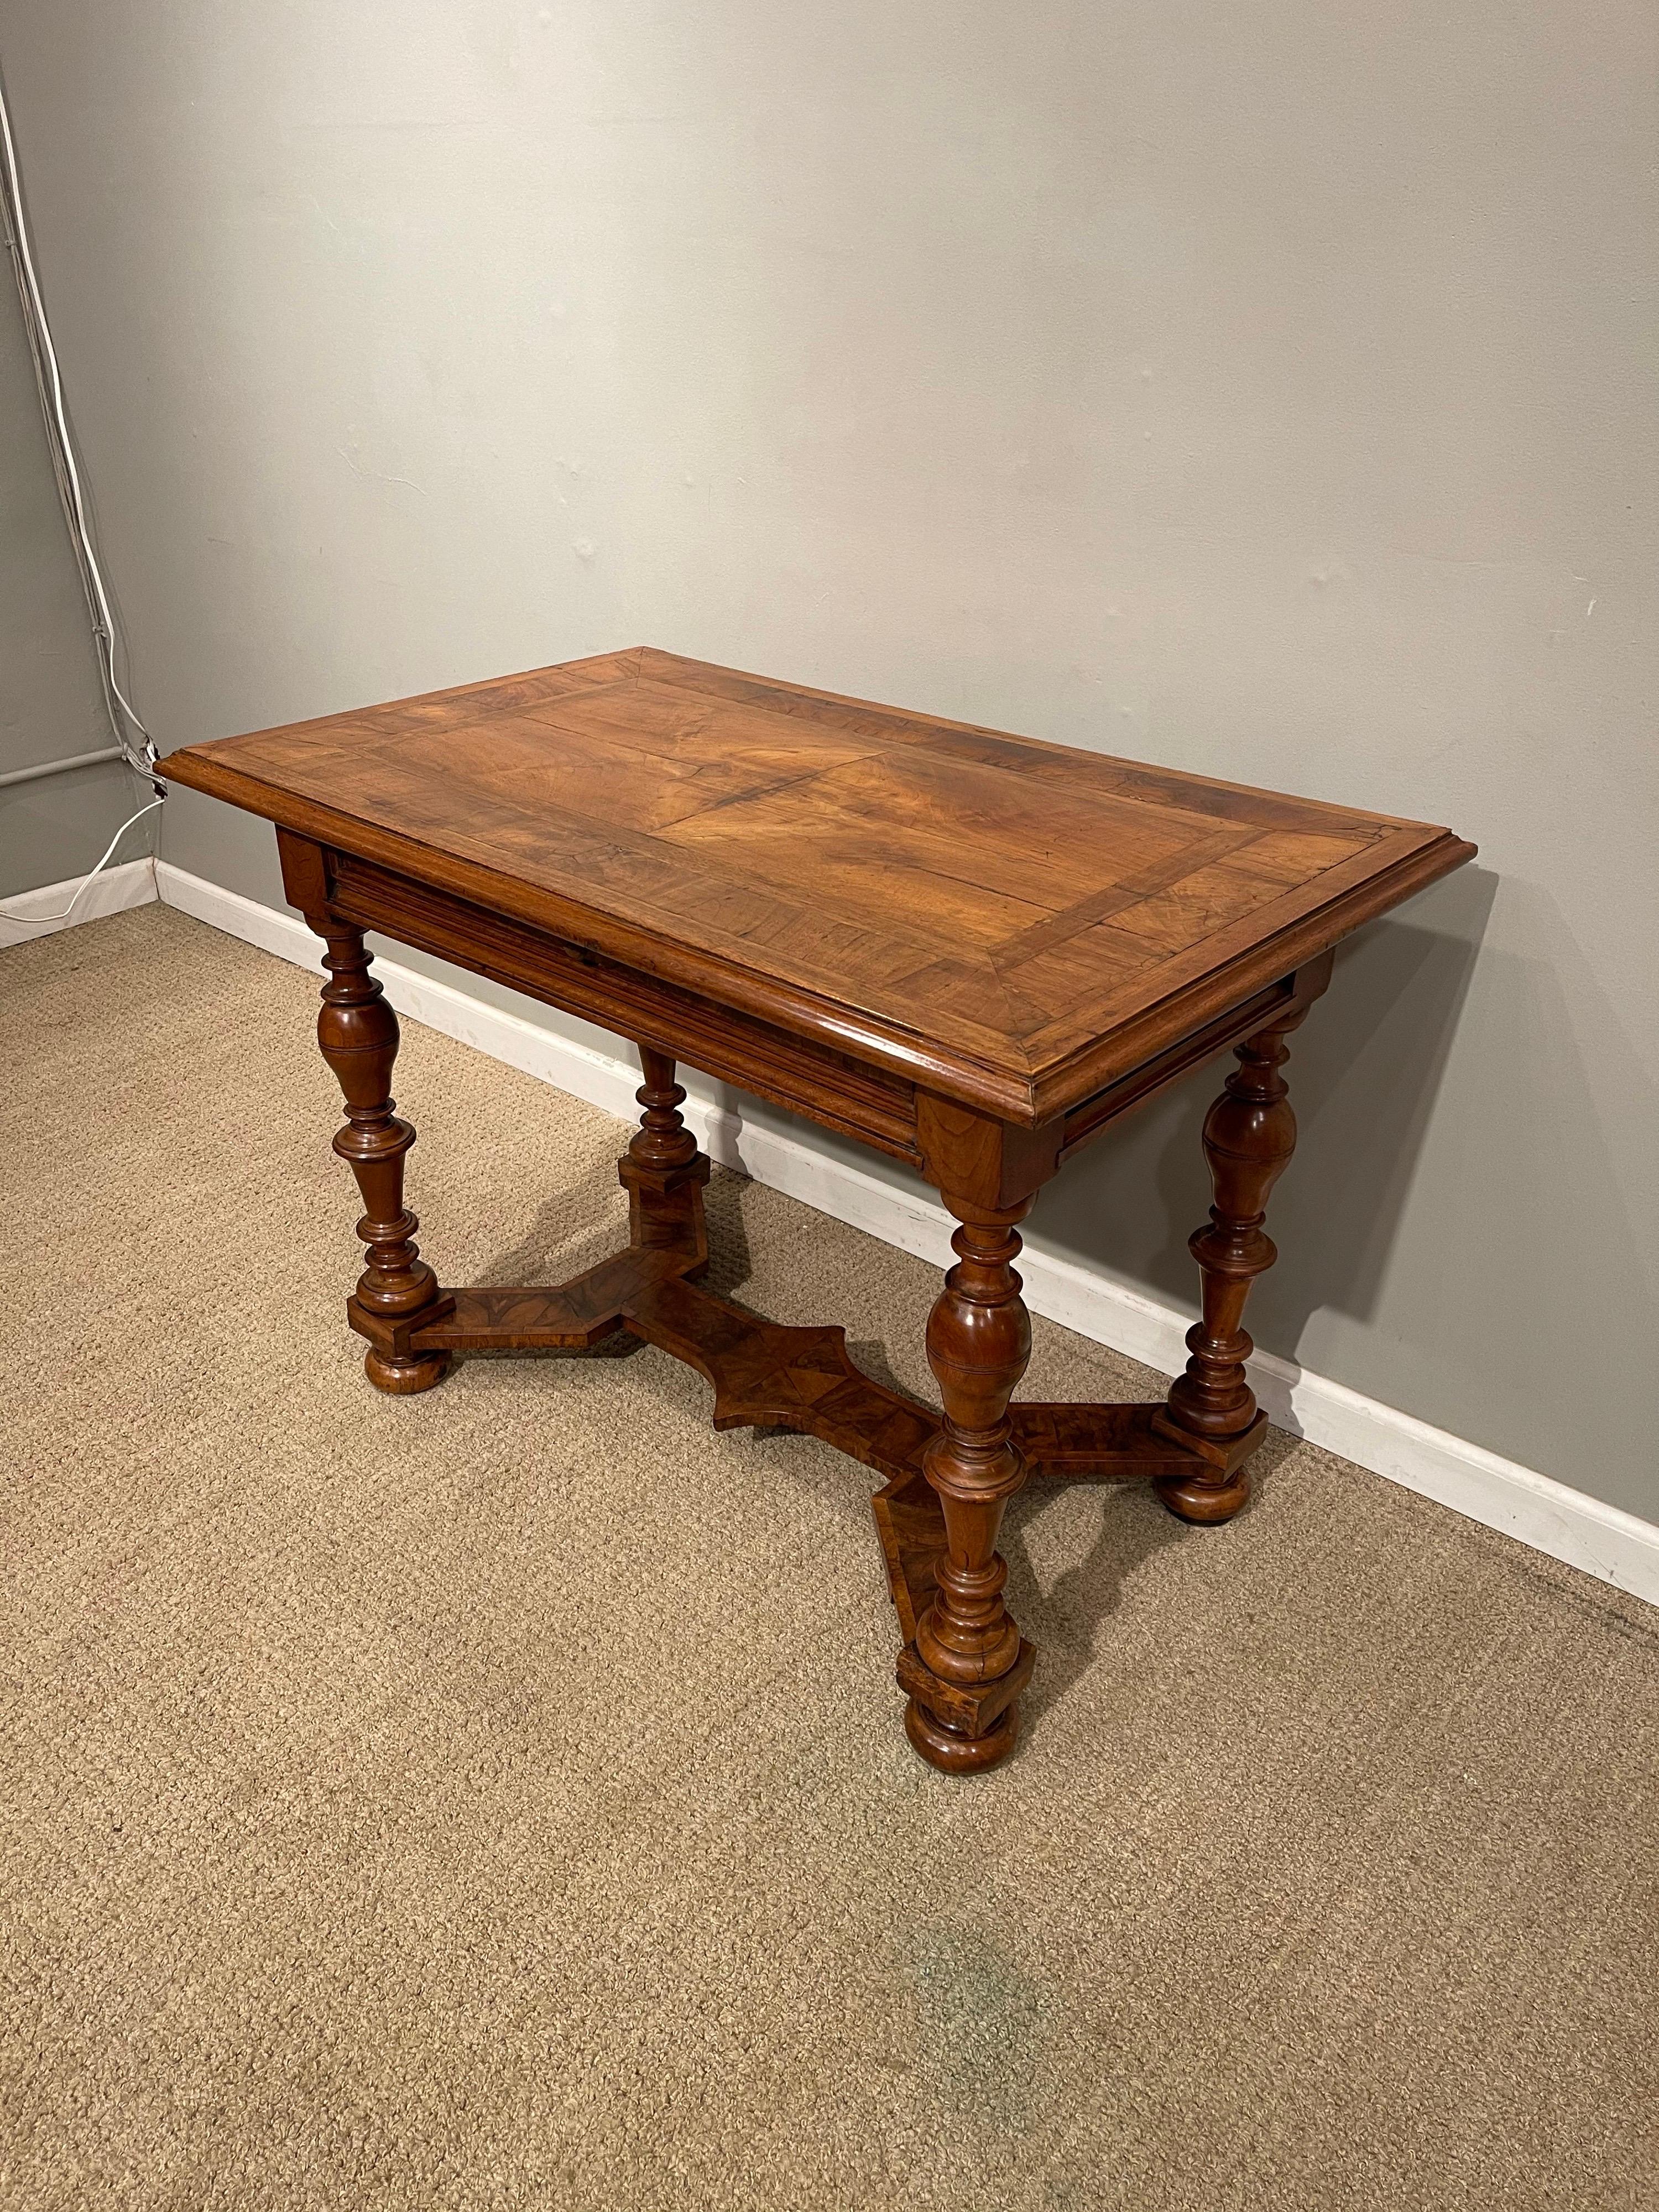 Turned walnut center table, English, late 17th century.